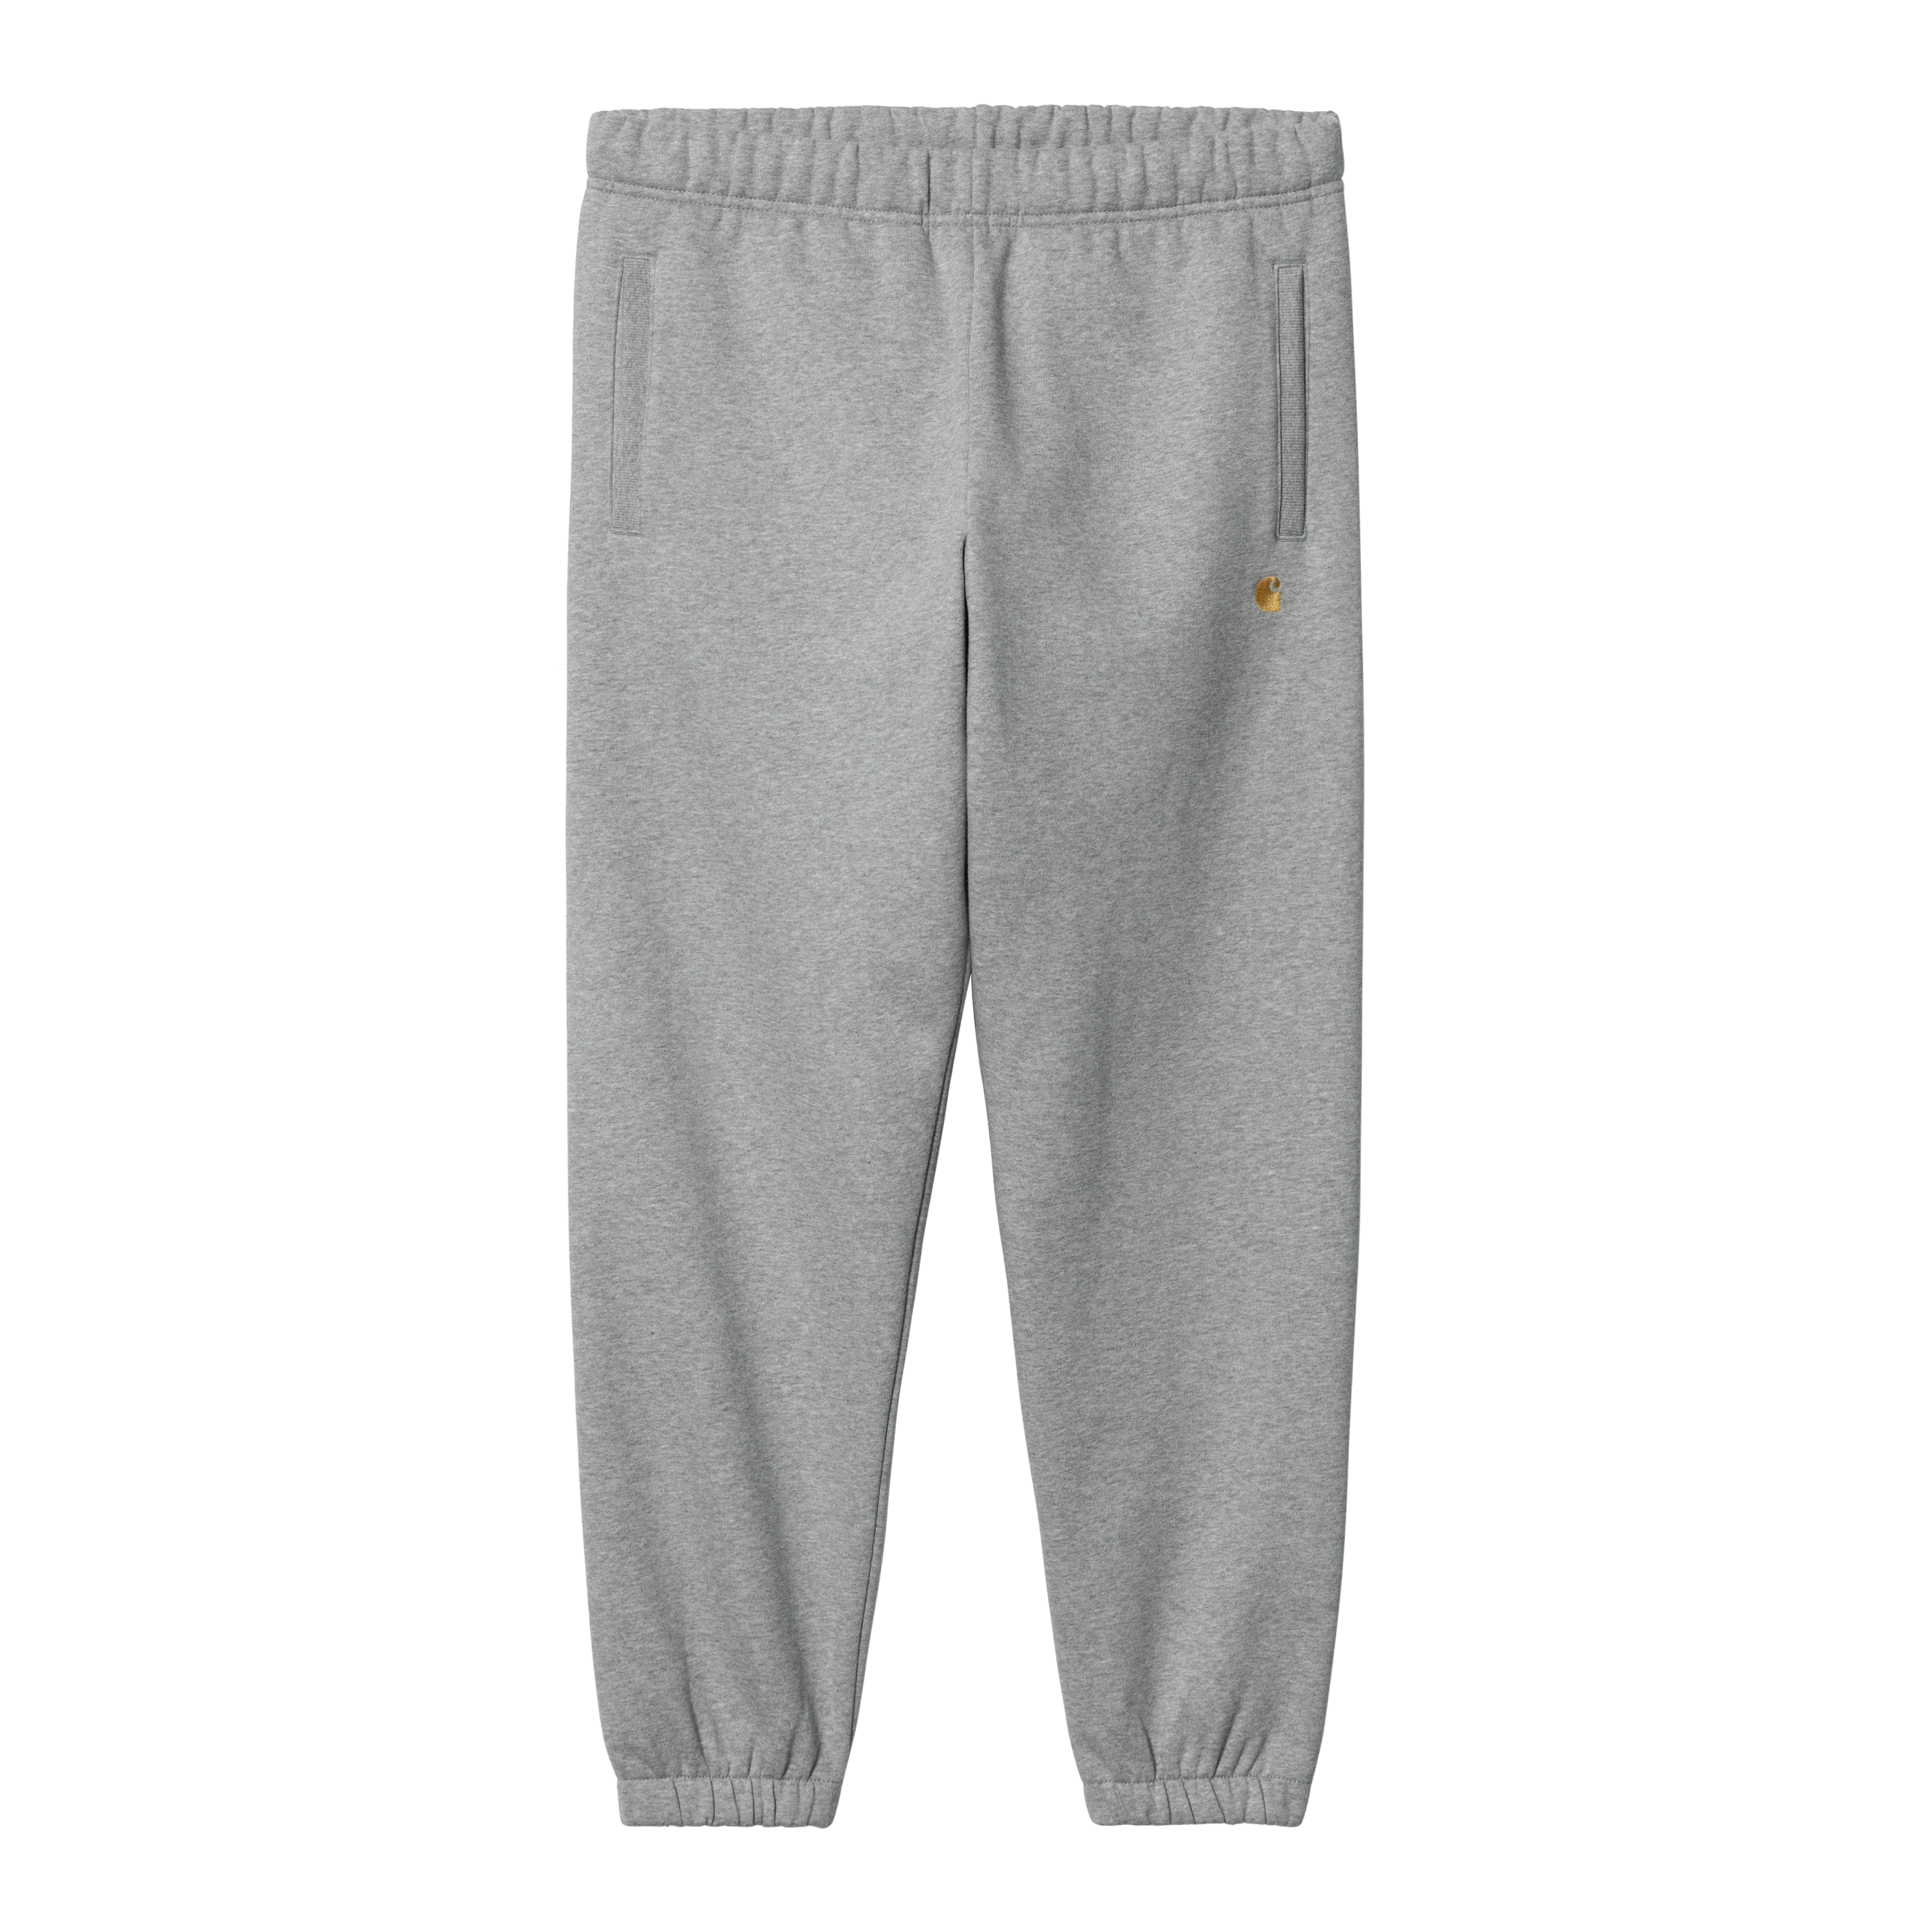 Carhartt Mens Vista Sweatpants Joggers Washed Cotton Cuffed Ankle  Drawstring